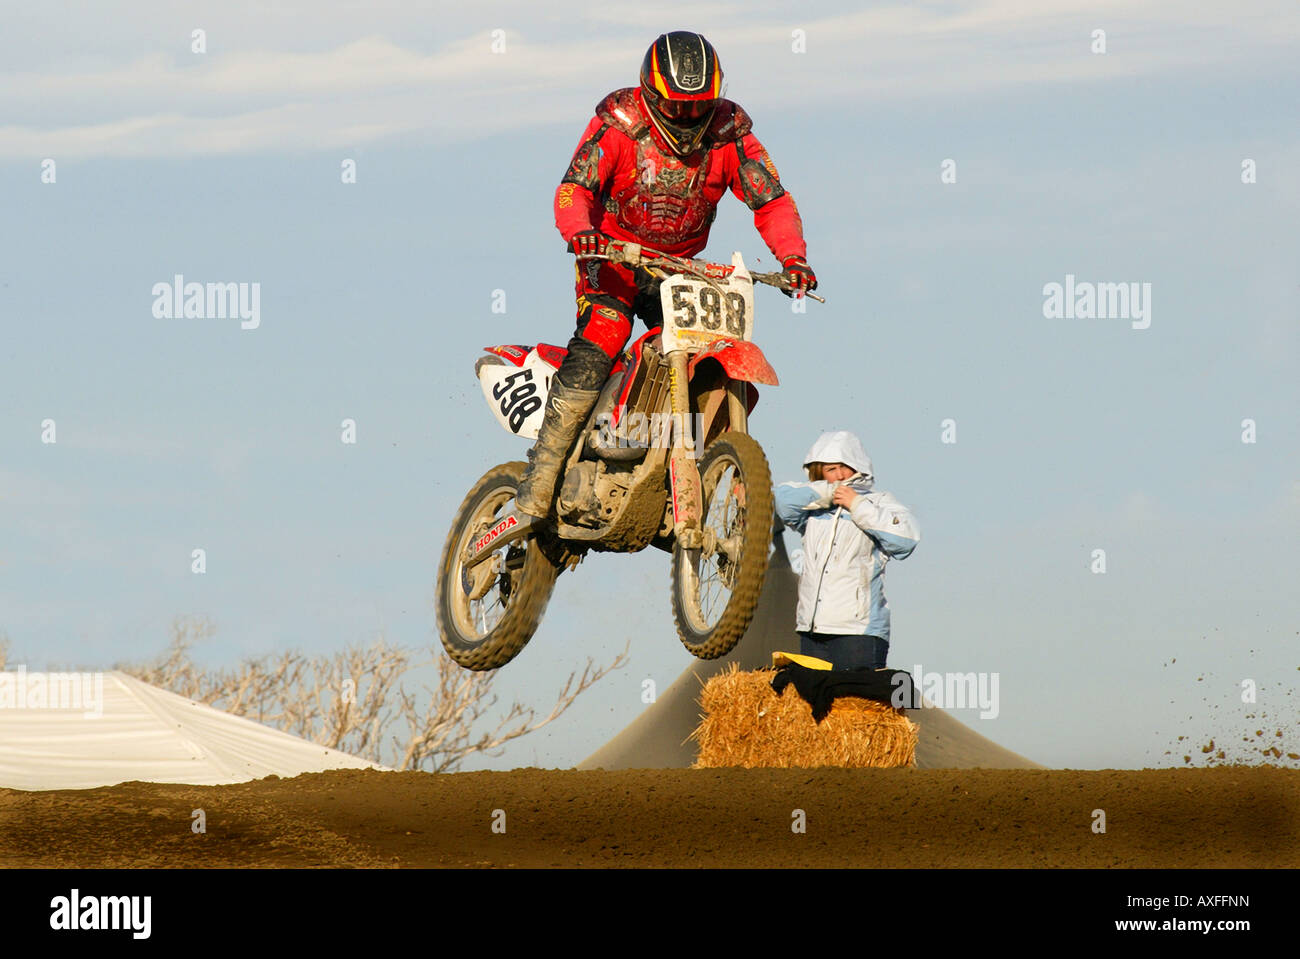 Motorcycle dirt bikes in Day in the Dirt Race, California Stock Photo